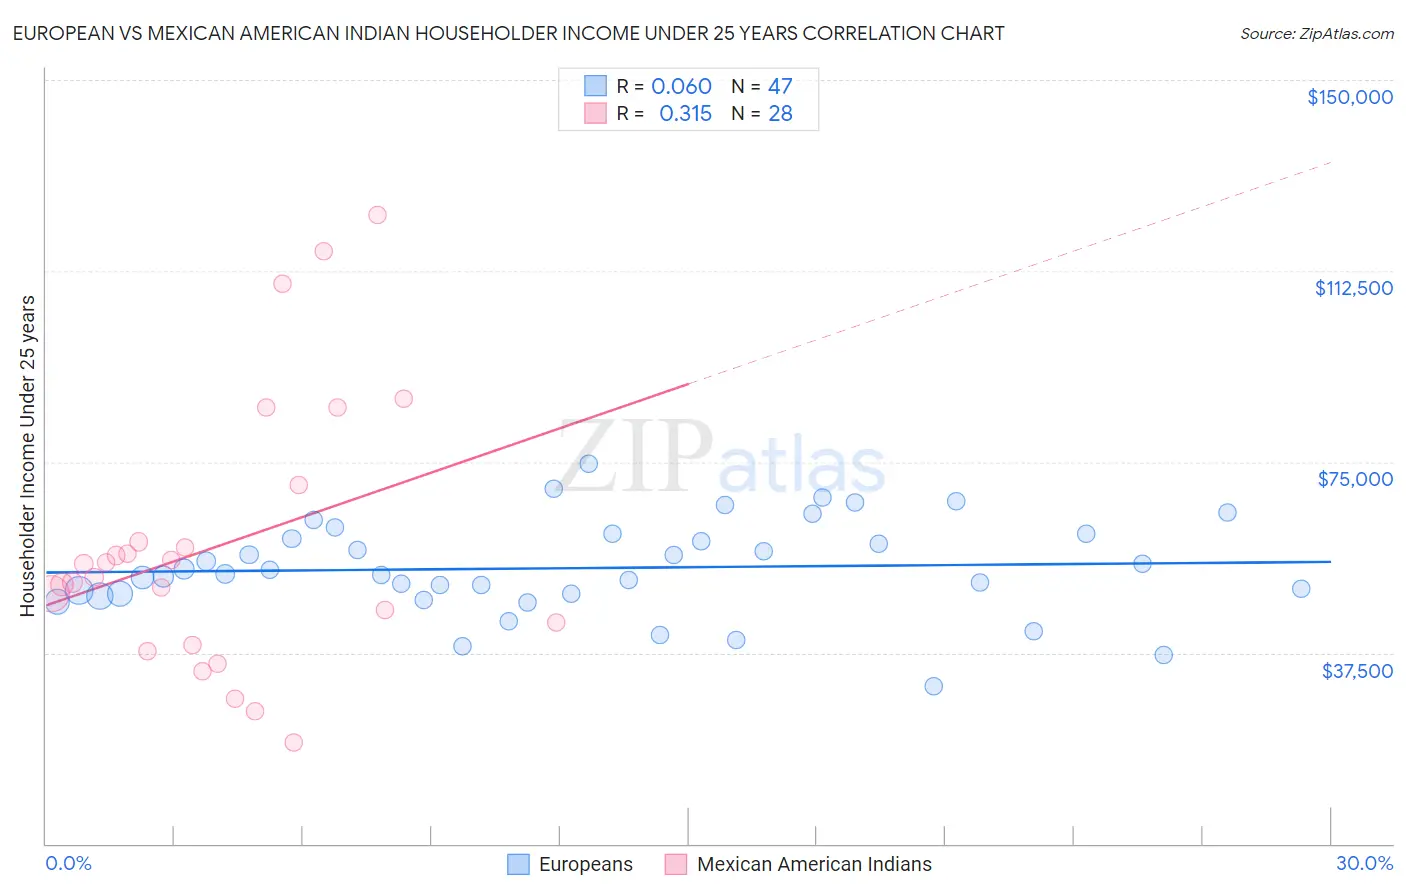 European vs Mexican American Indian Householder Income Under 25 years